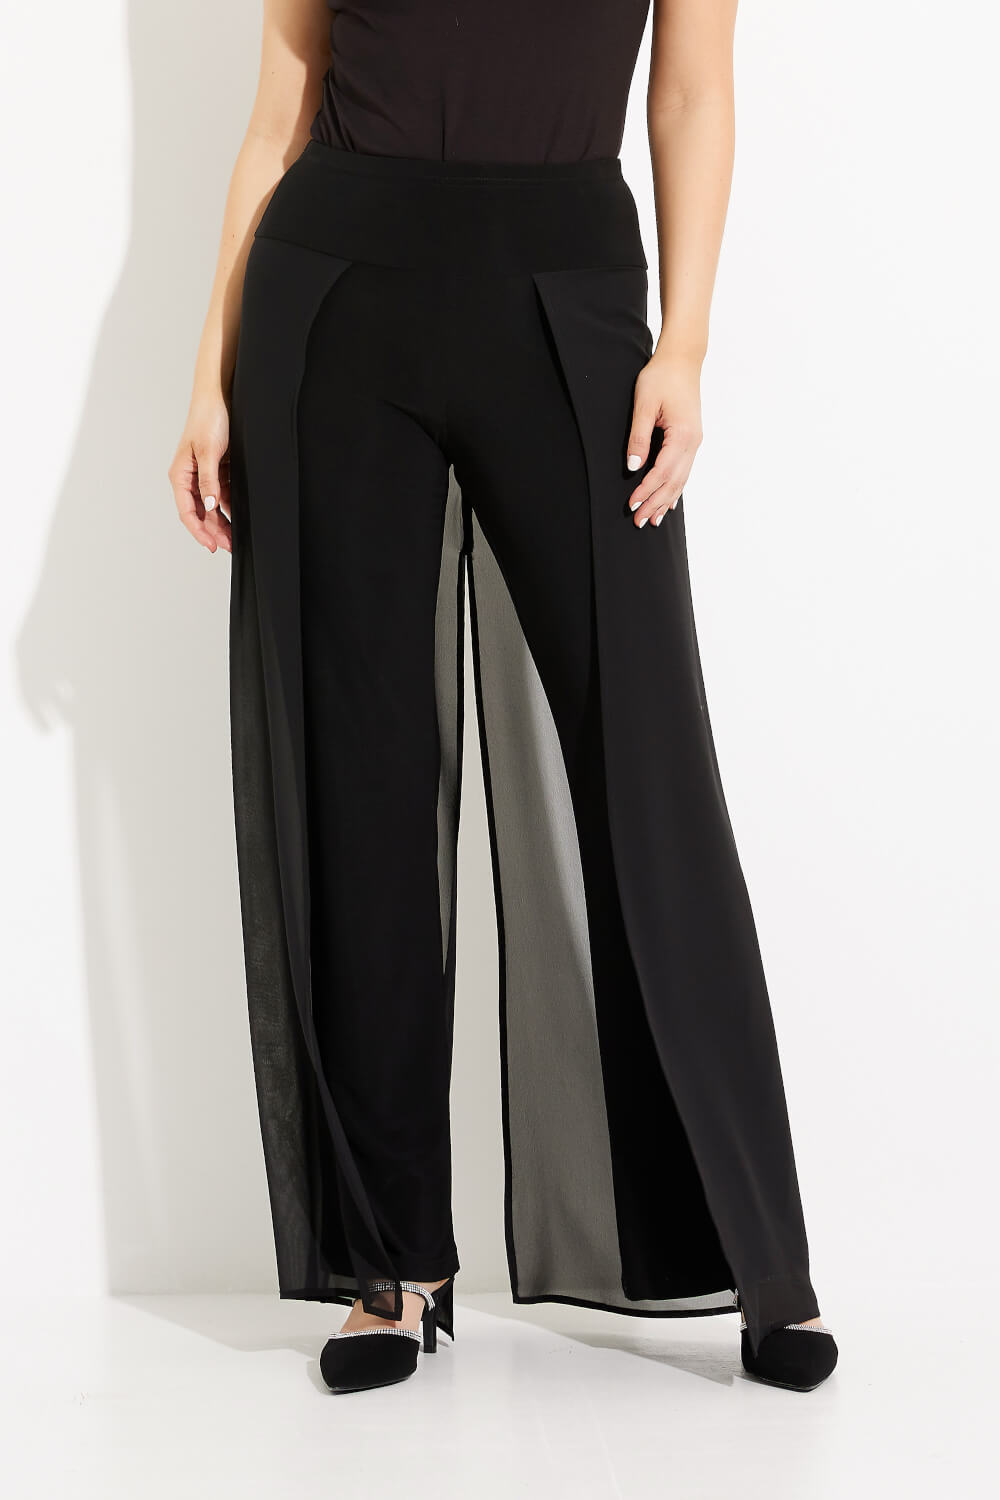 Faux Leather Flared Leg Pants Style 233179